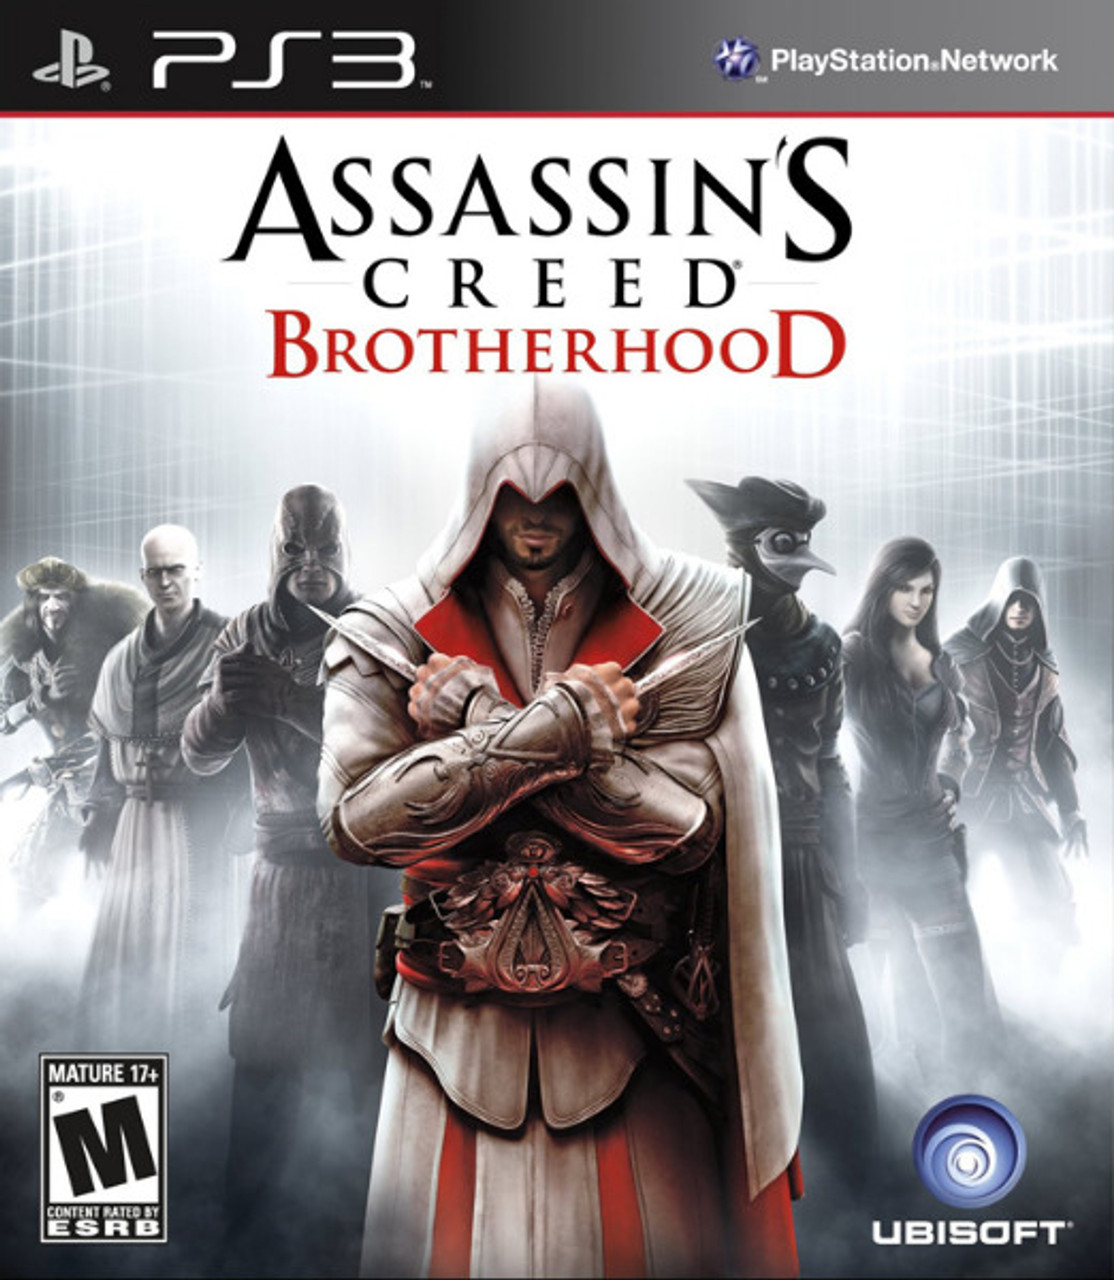 ASSASSIN'S CREED GAME PS3  Assassins creed game, Assassins creed